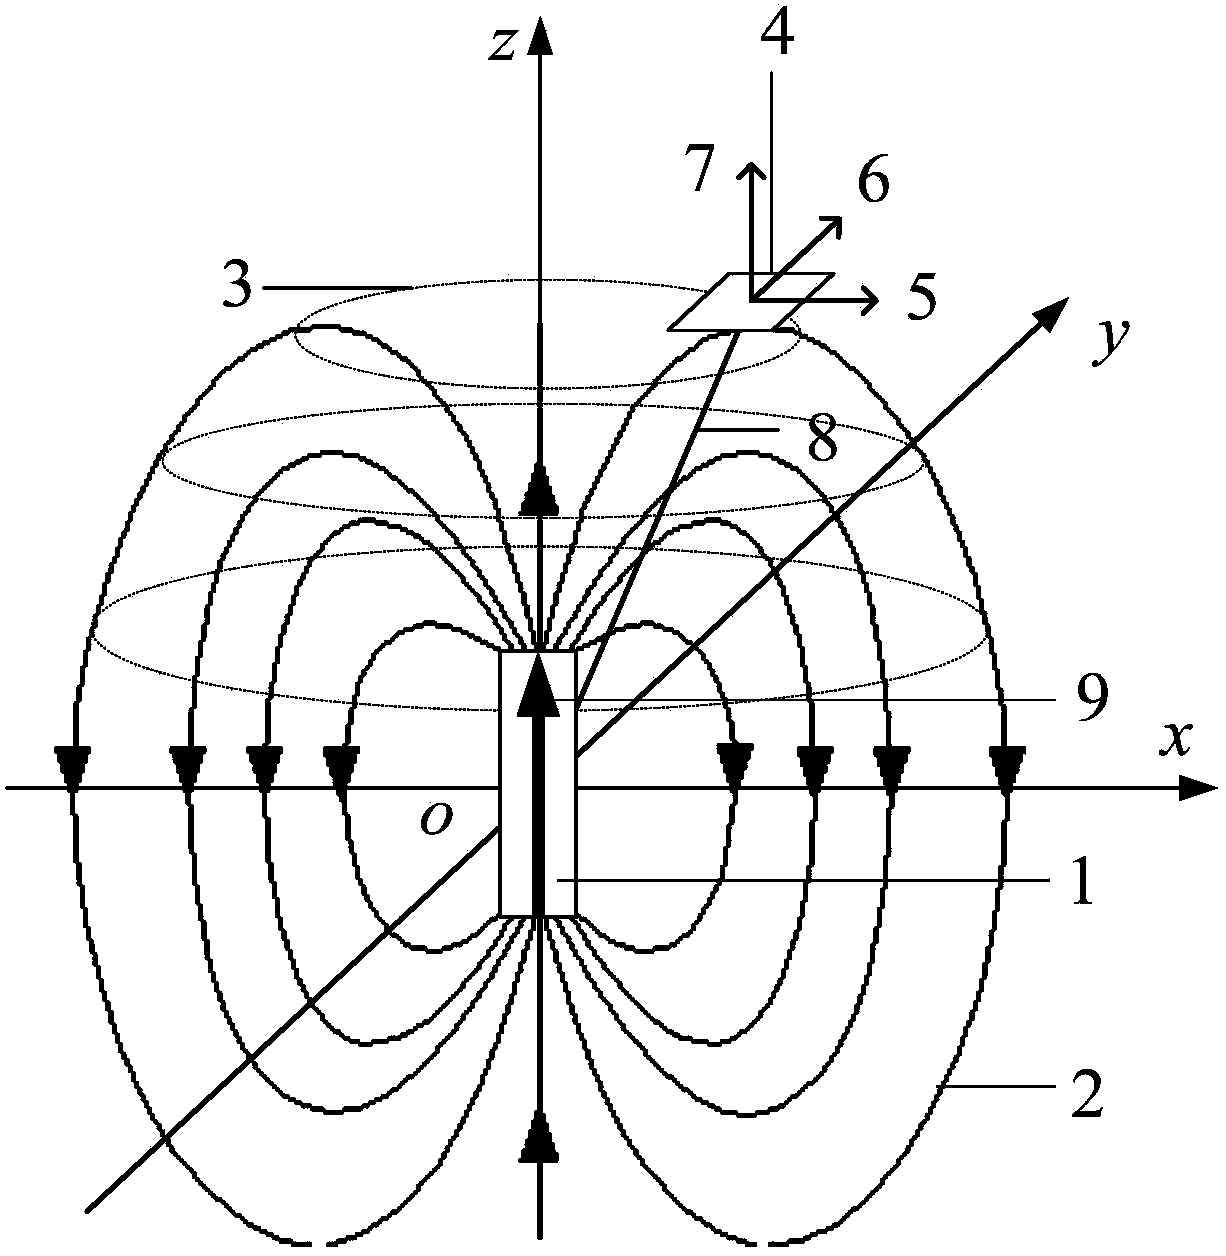 Linear positioning method based on marked magnetic source with permanent magnetic dipole moment